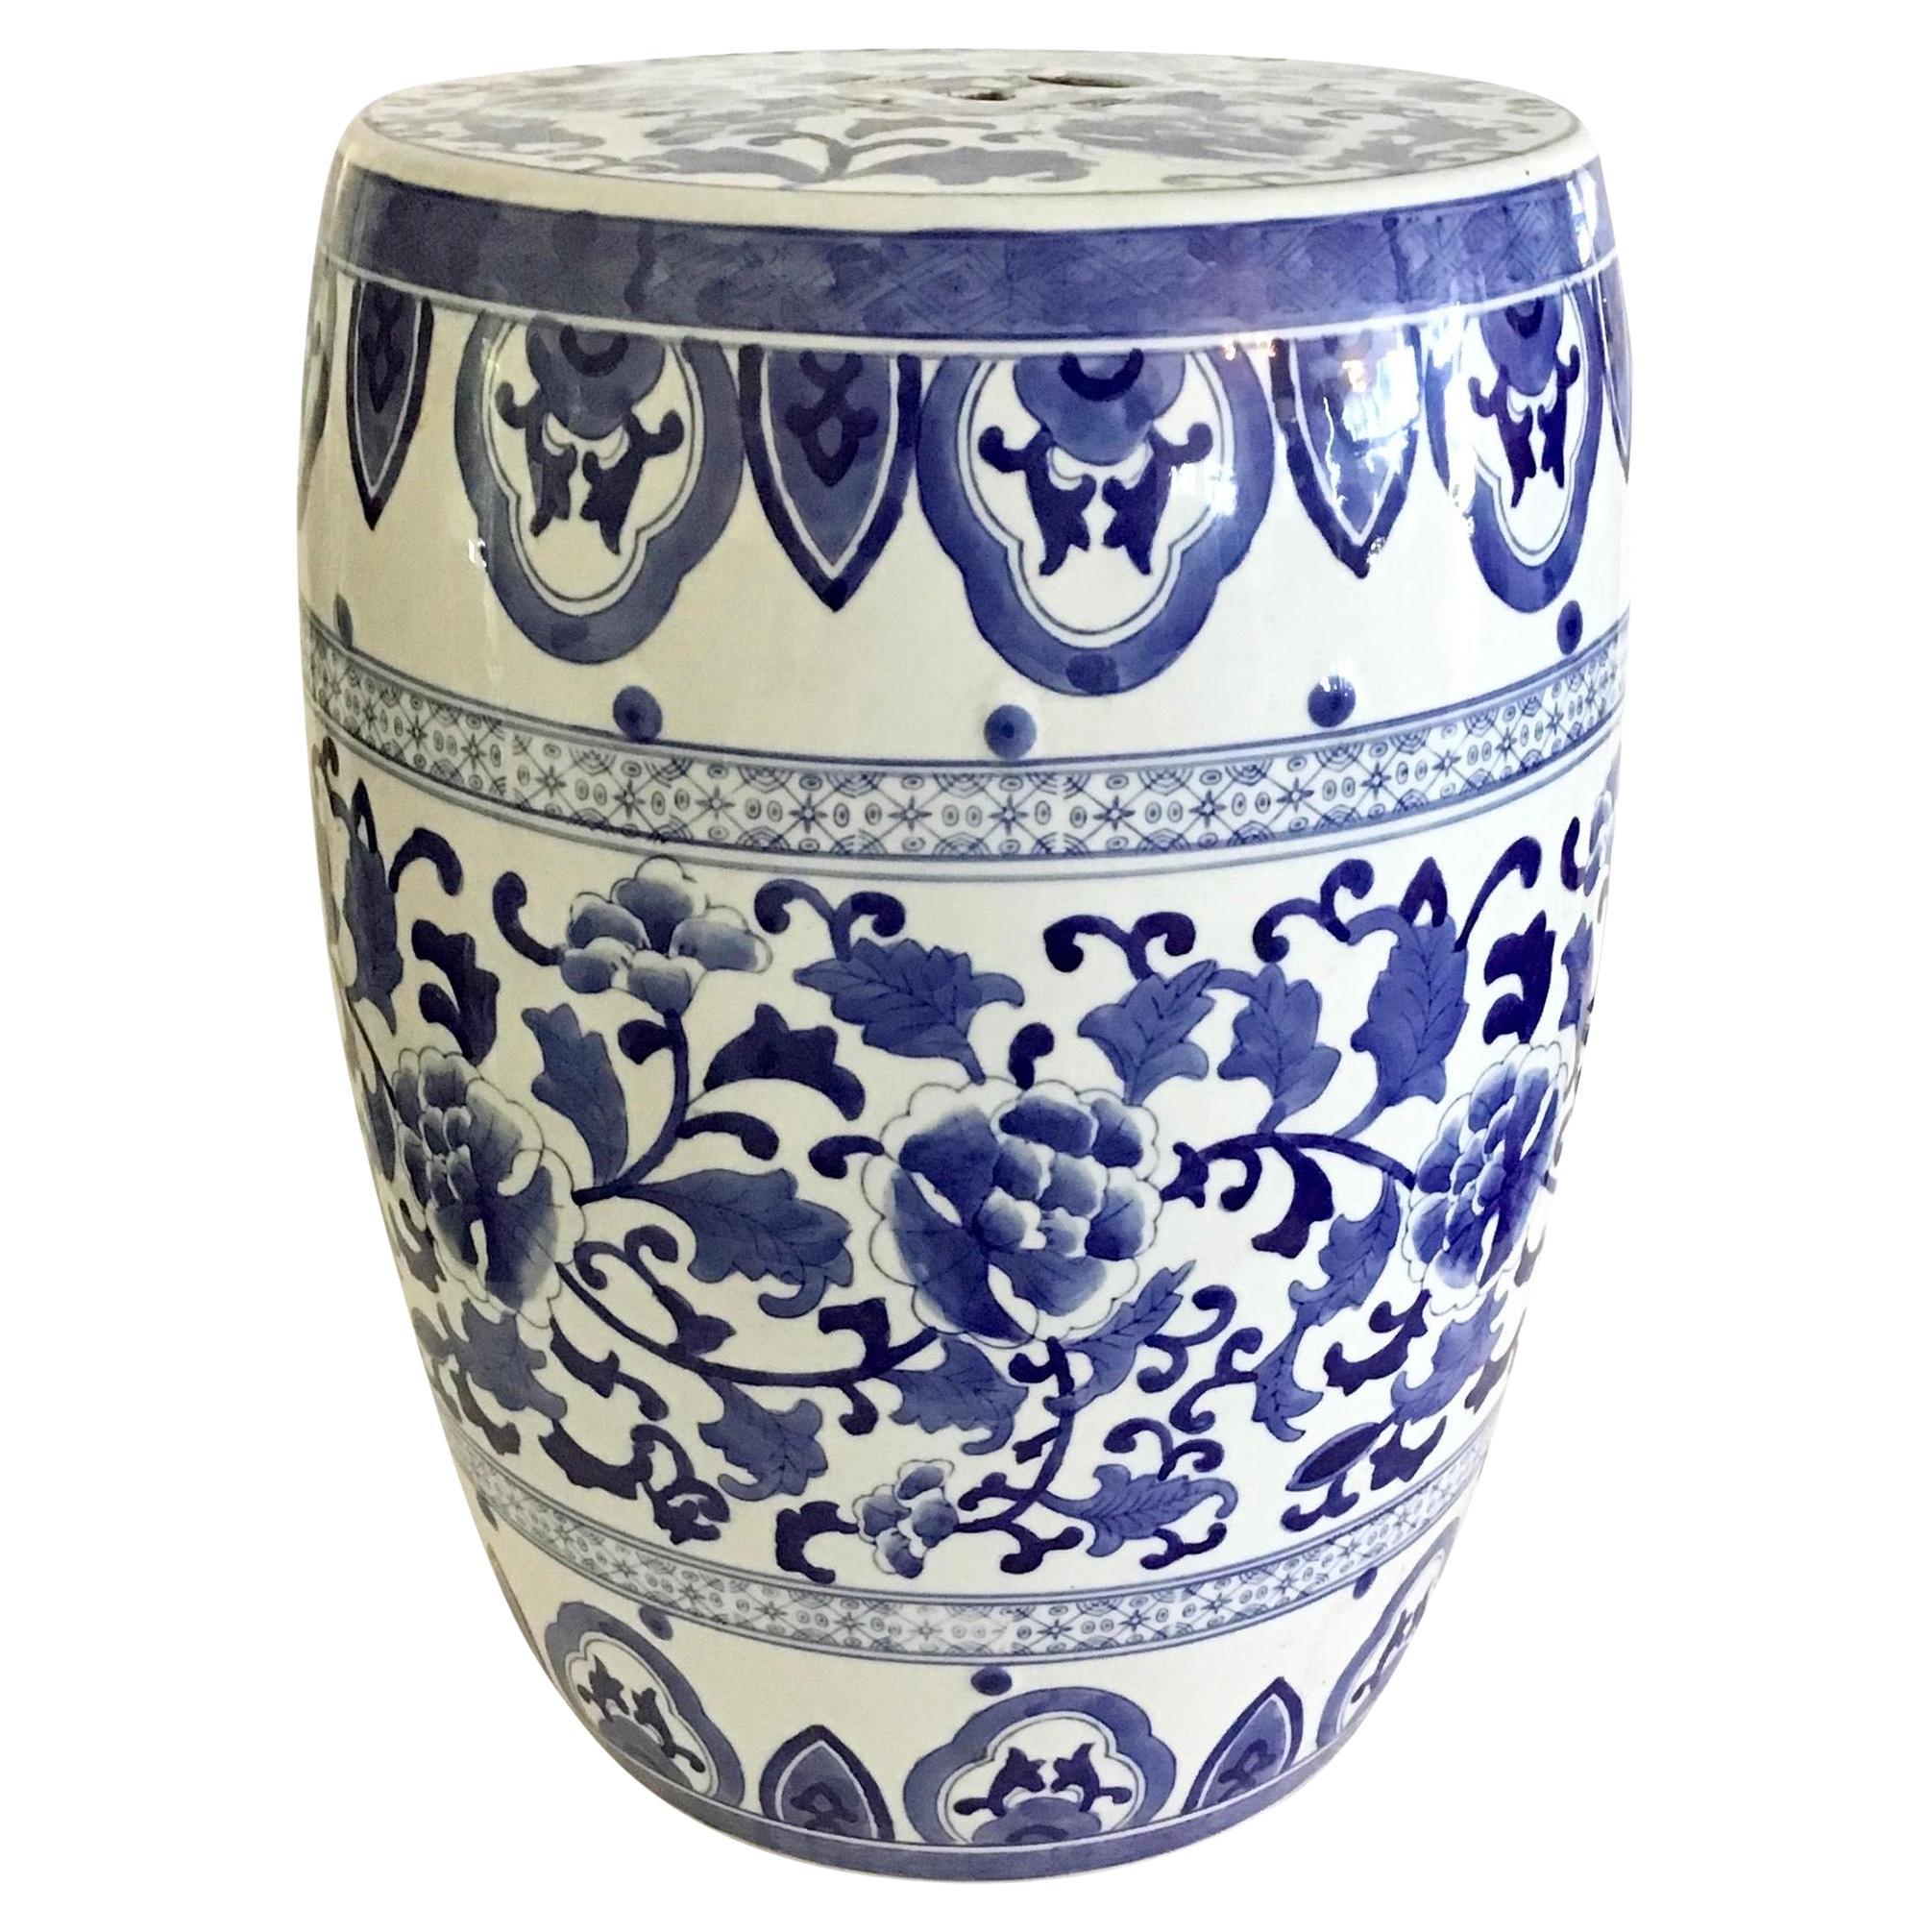 Blue and White Floral Ceramic Garden Seat